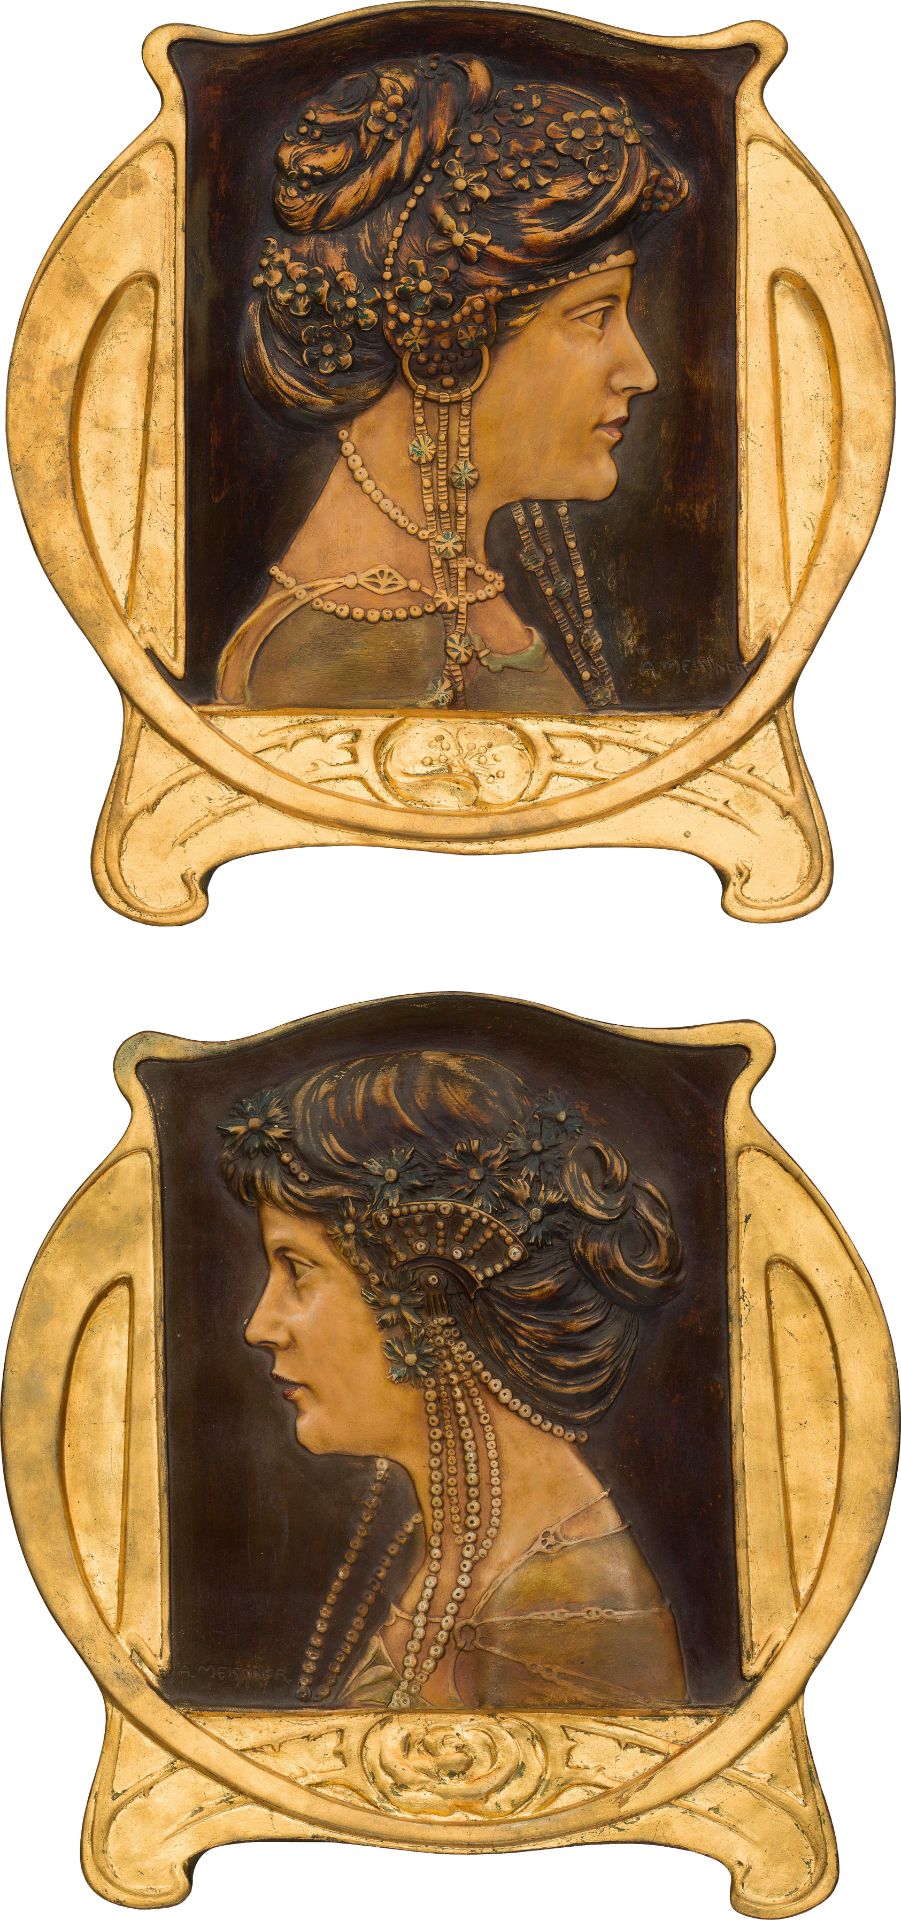 Ernst Wahliss: Pair of relief plates